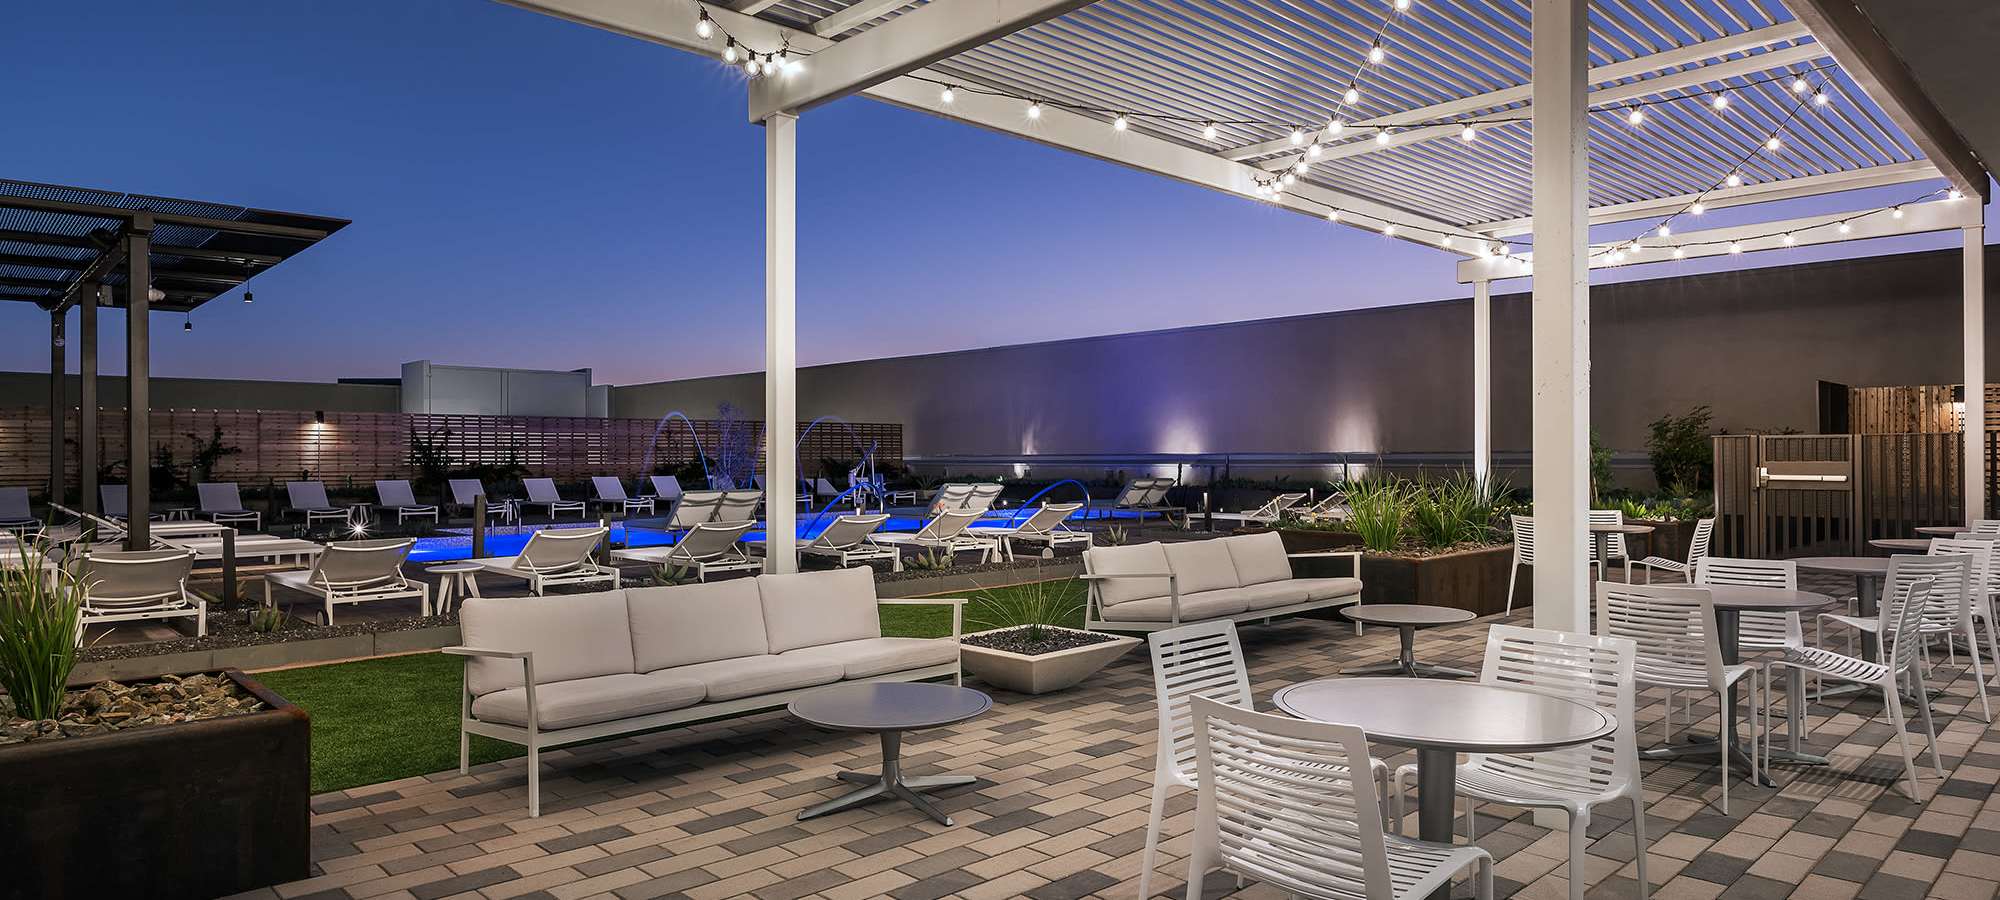 Outdoor, rooftop seating area at The Piedmont in Tempe, Arizona